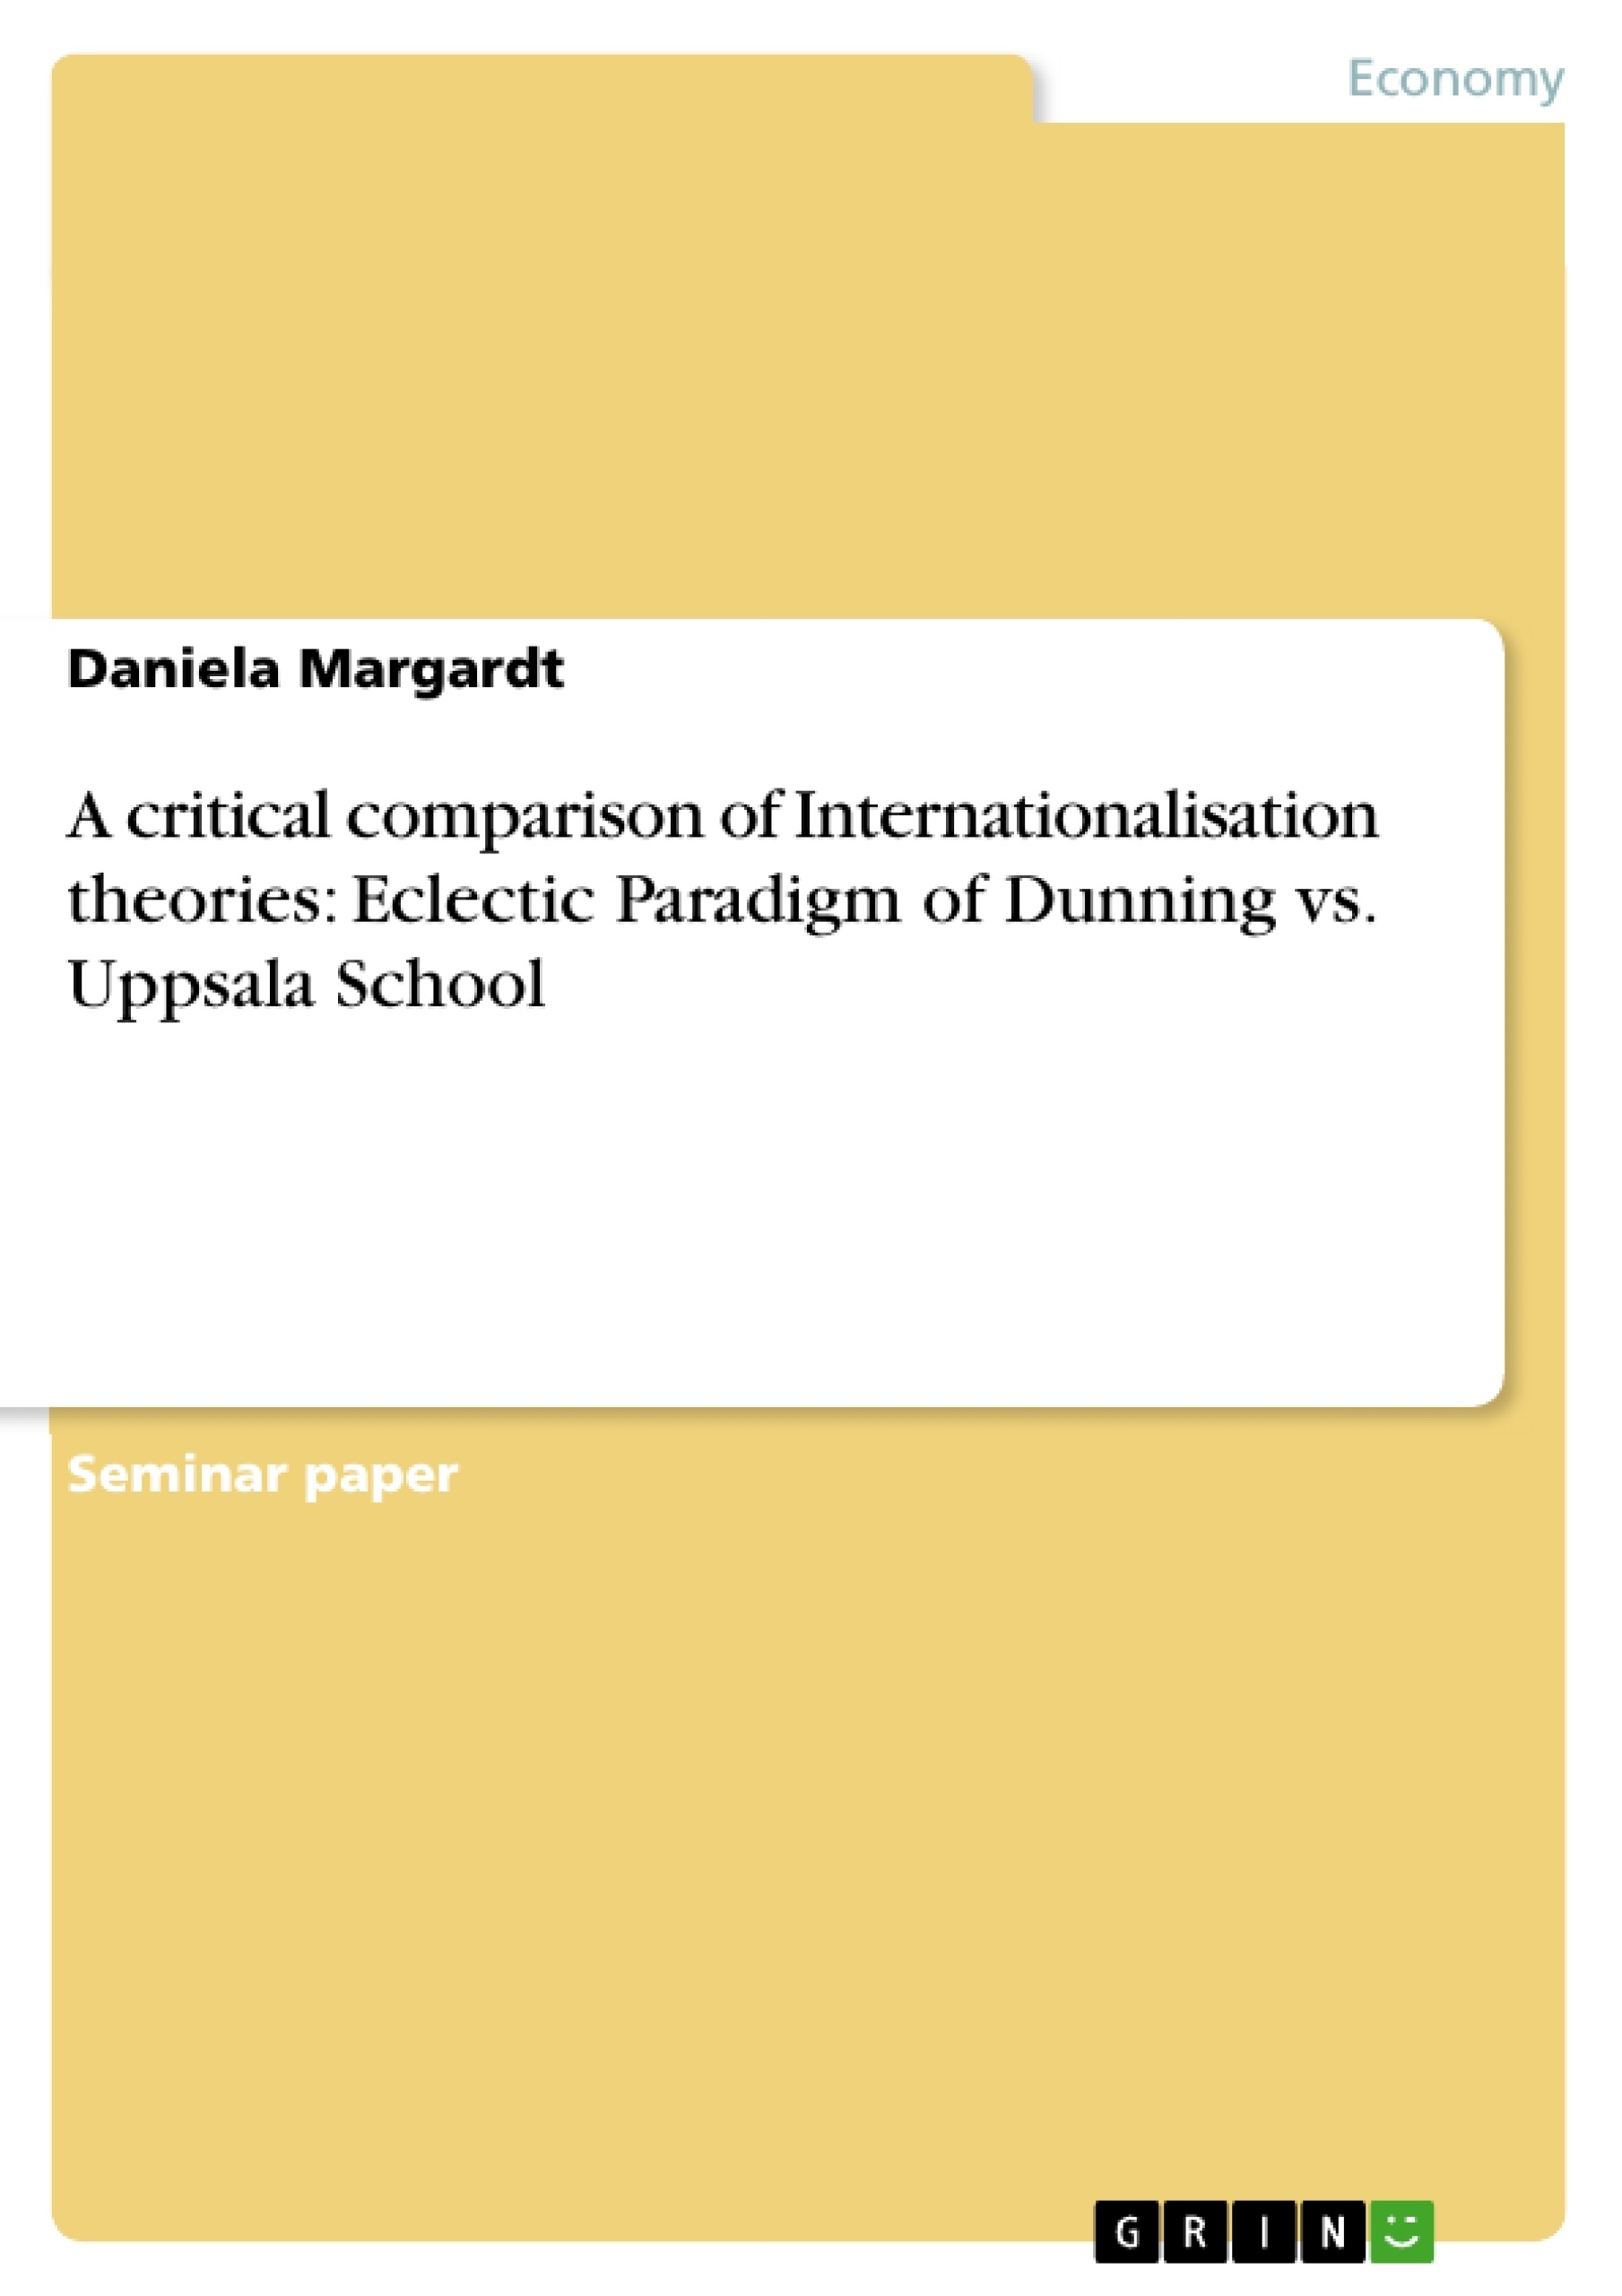 Title: A critical comparison of Internationalisation theories: Eclectic Paradigm of Dunning vs. Uppsala School